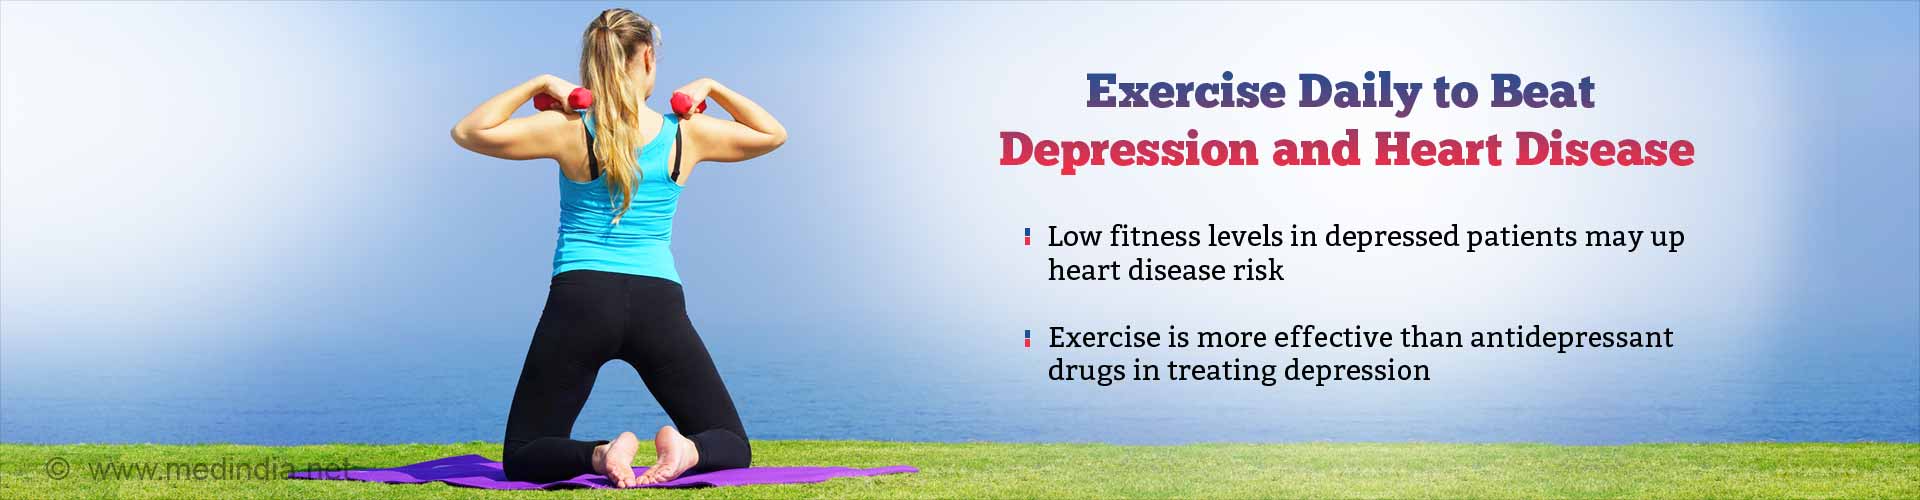 Exercise daily to beat depression and heart disease. Low fitness levels in depressed patients may up heart disease risk. Excercise is more effective than antidepressant drugs in treating depression.